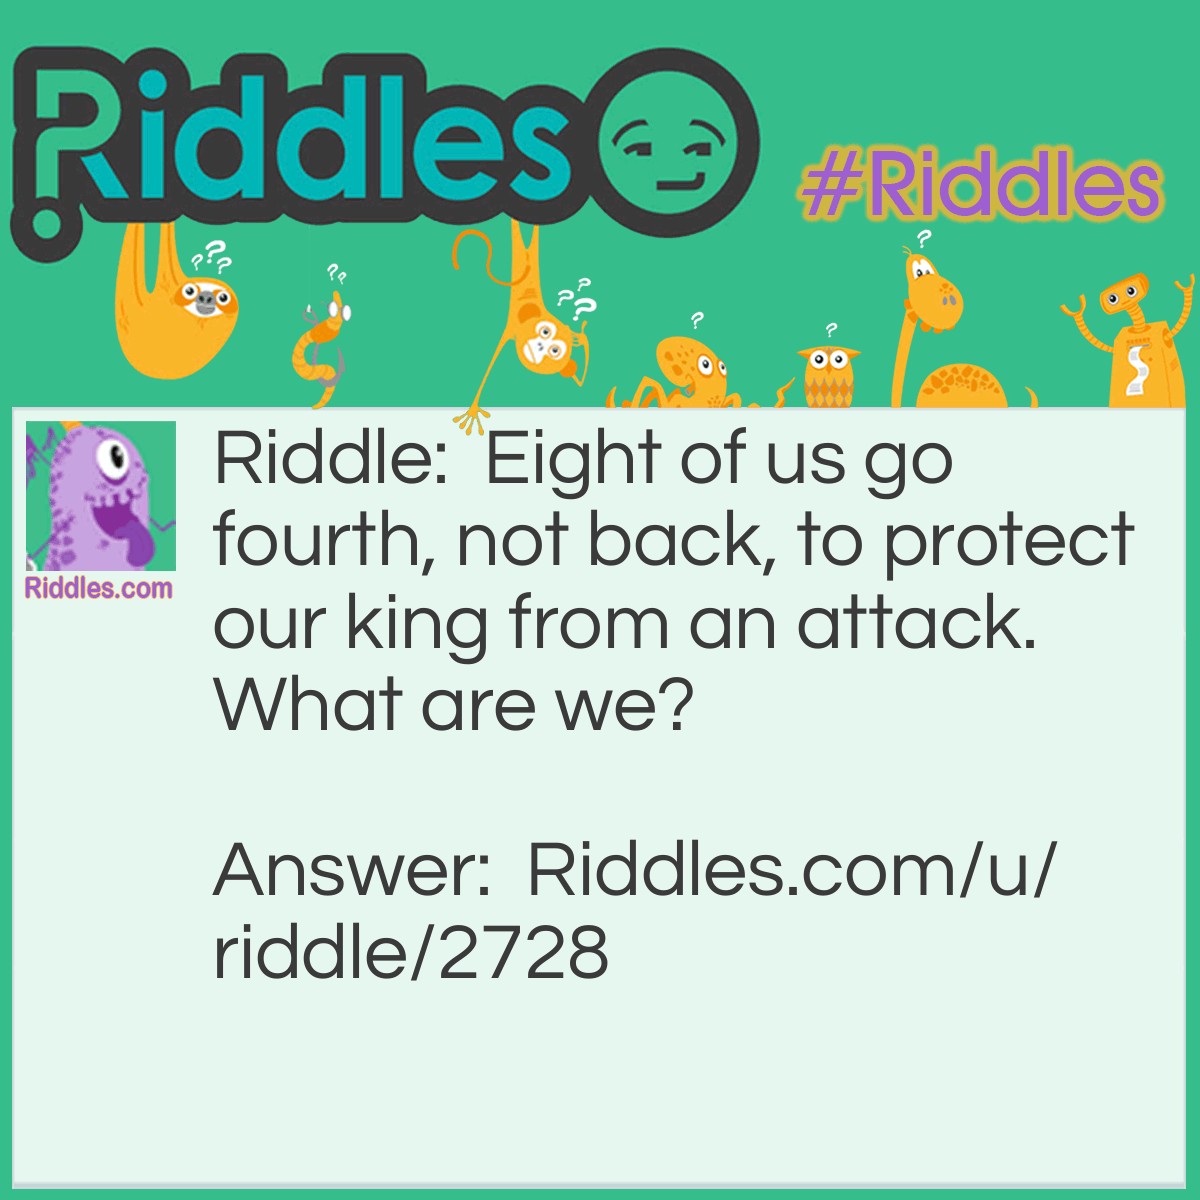 Riddle: Eight of us go fourth, not back, to protect our king from an attack. What are we? Answer: Pawns in chess.